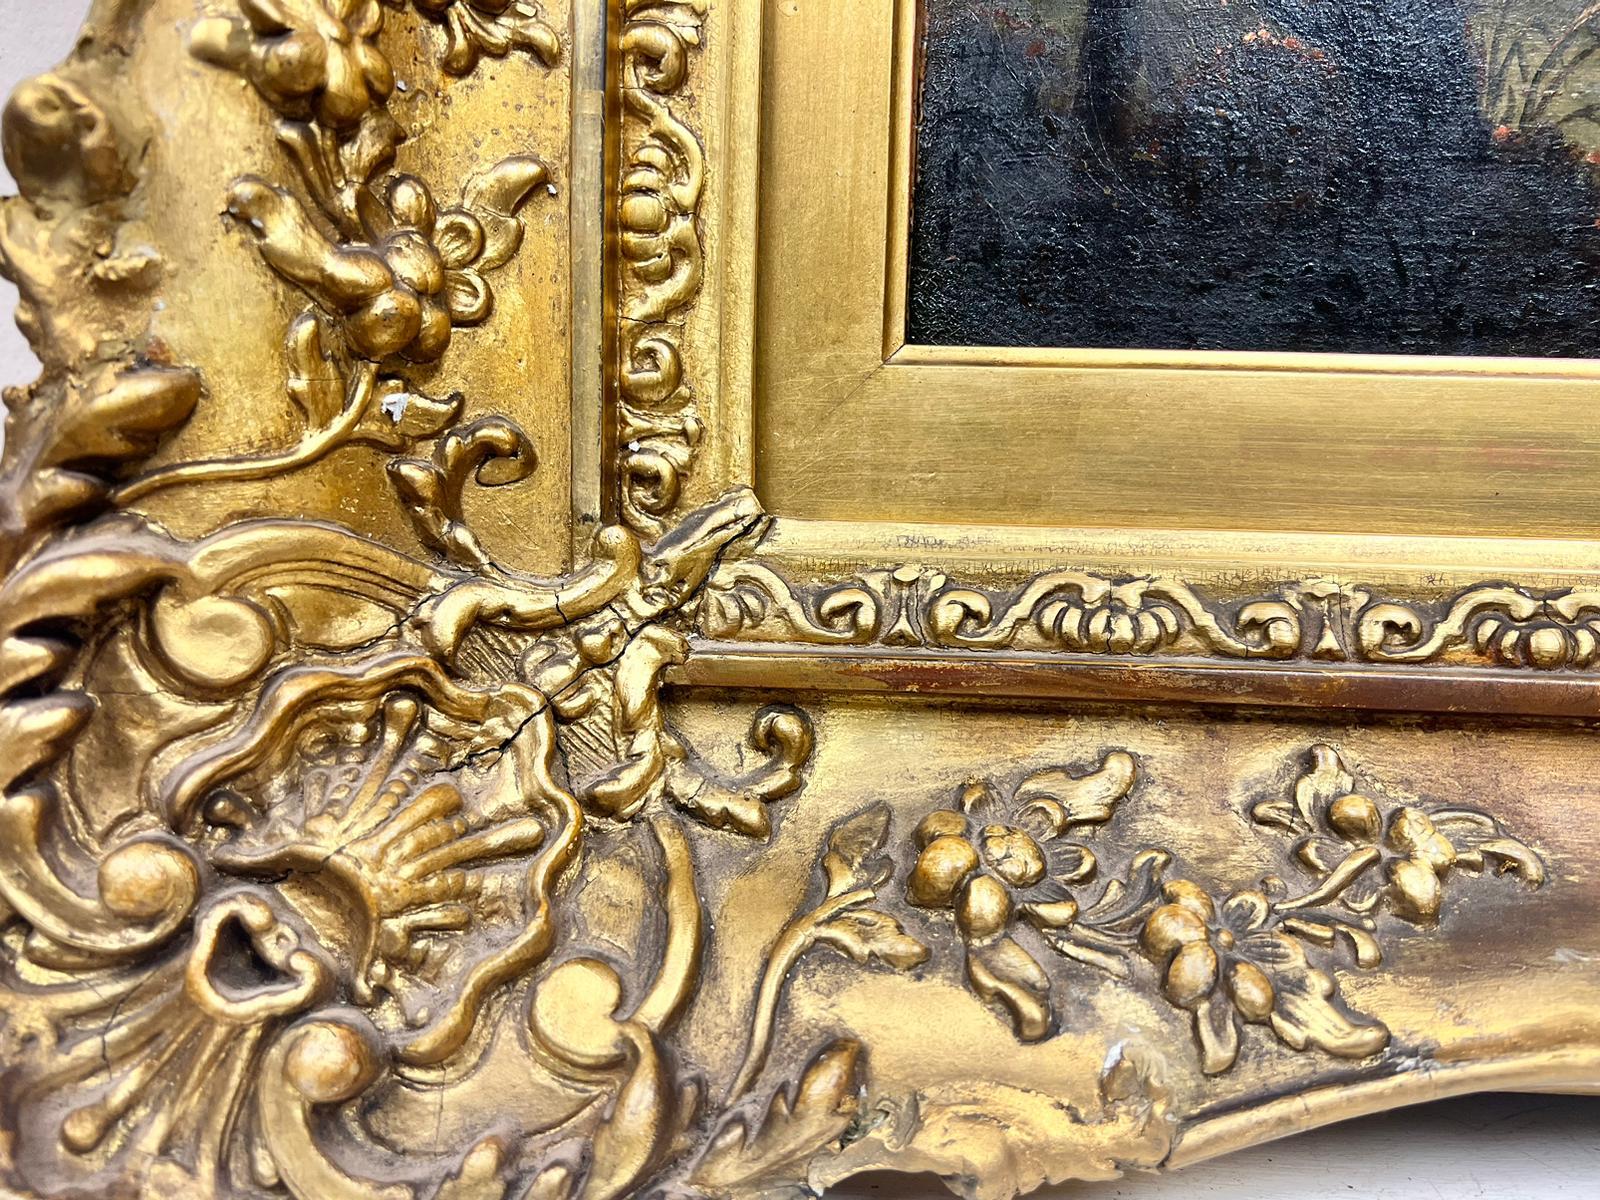 Figures in Far Reaching Landscape Antique British Oil Beautiful Gilt Frame - Old Masters Painting by 1800’s British